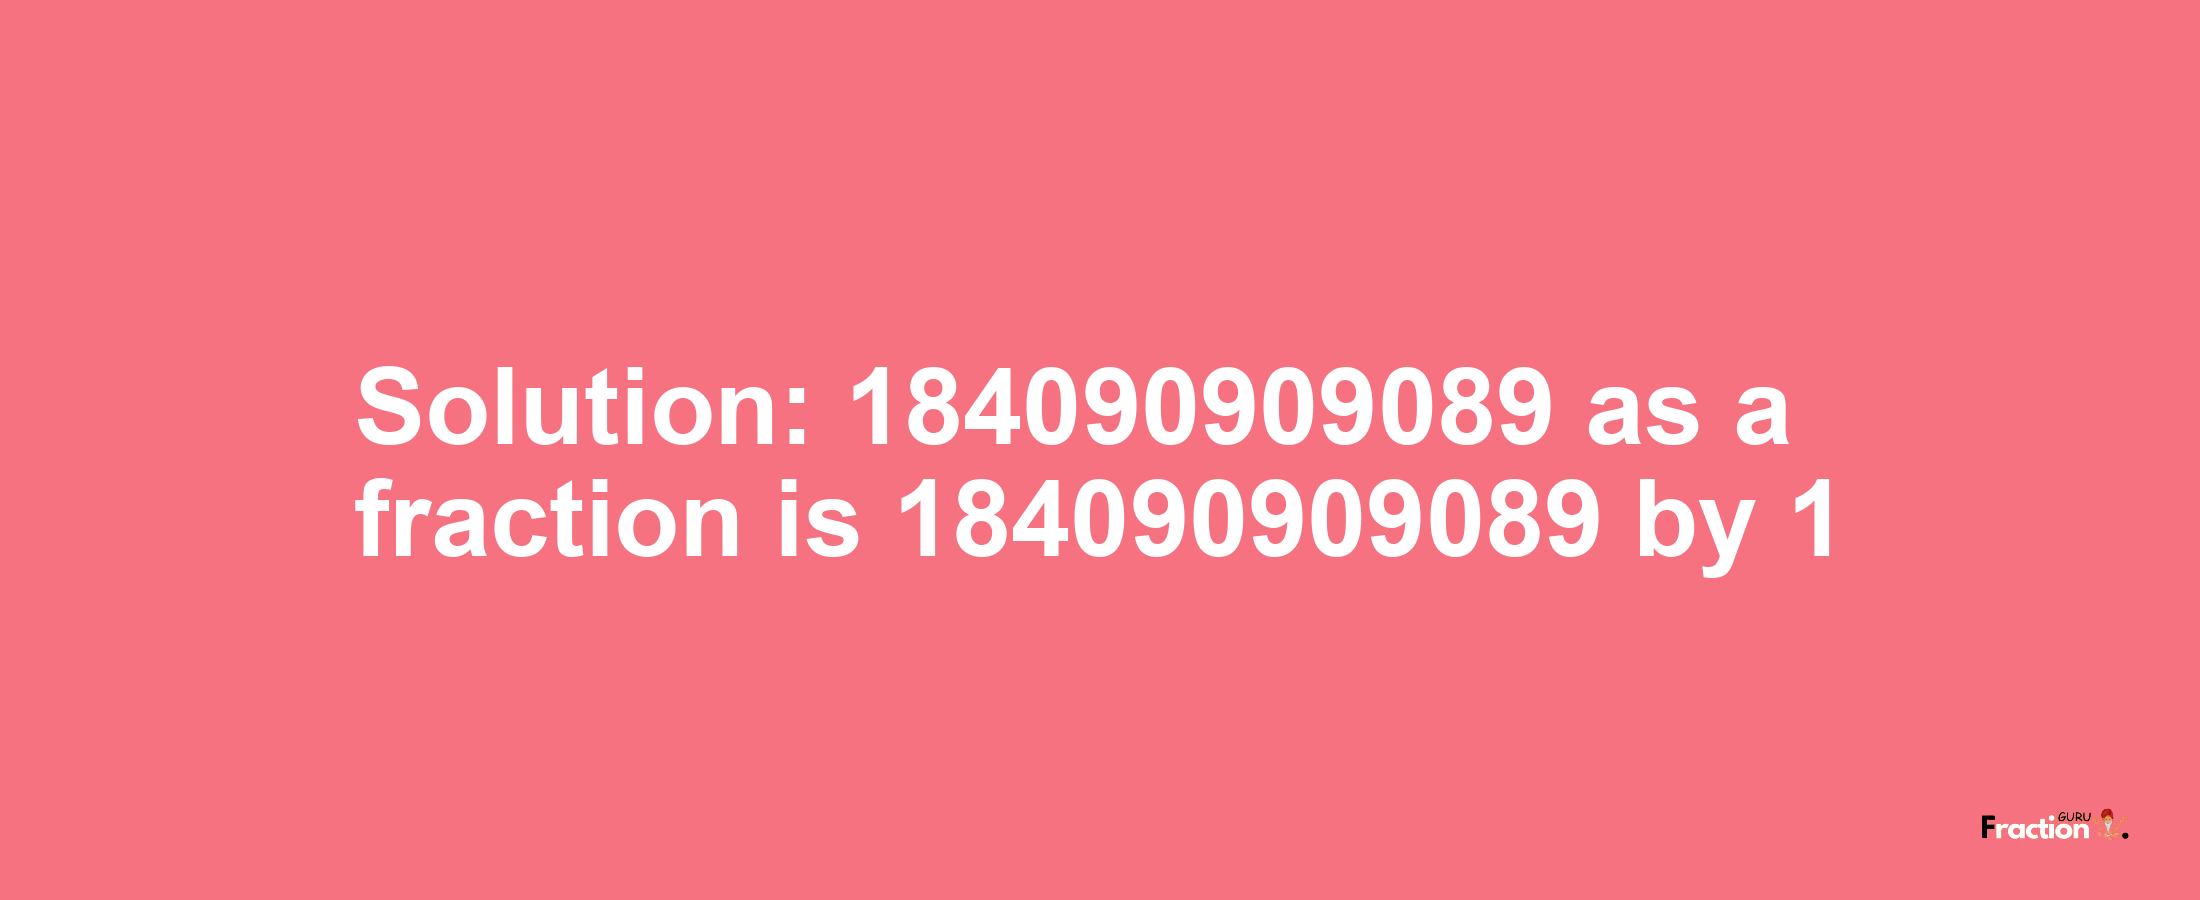 Solution:184090909089 as a fraction is 184090909089/1